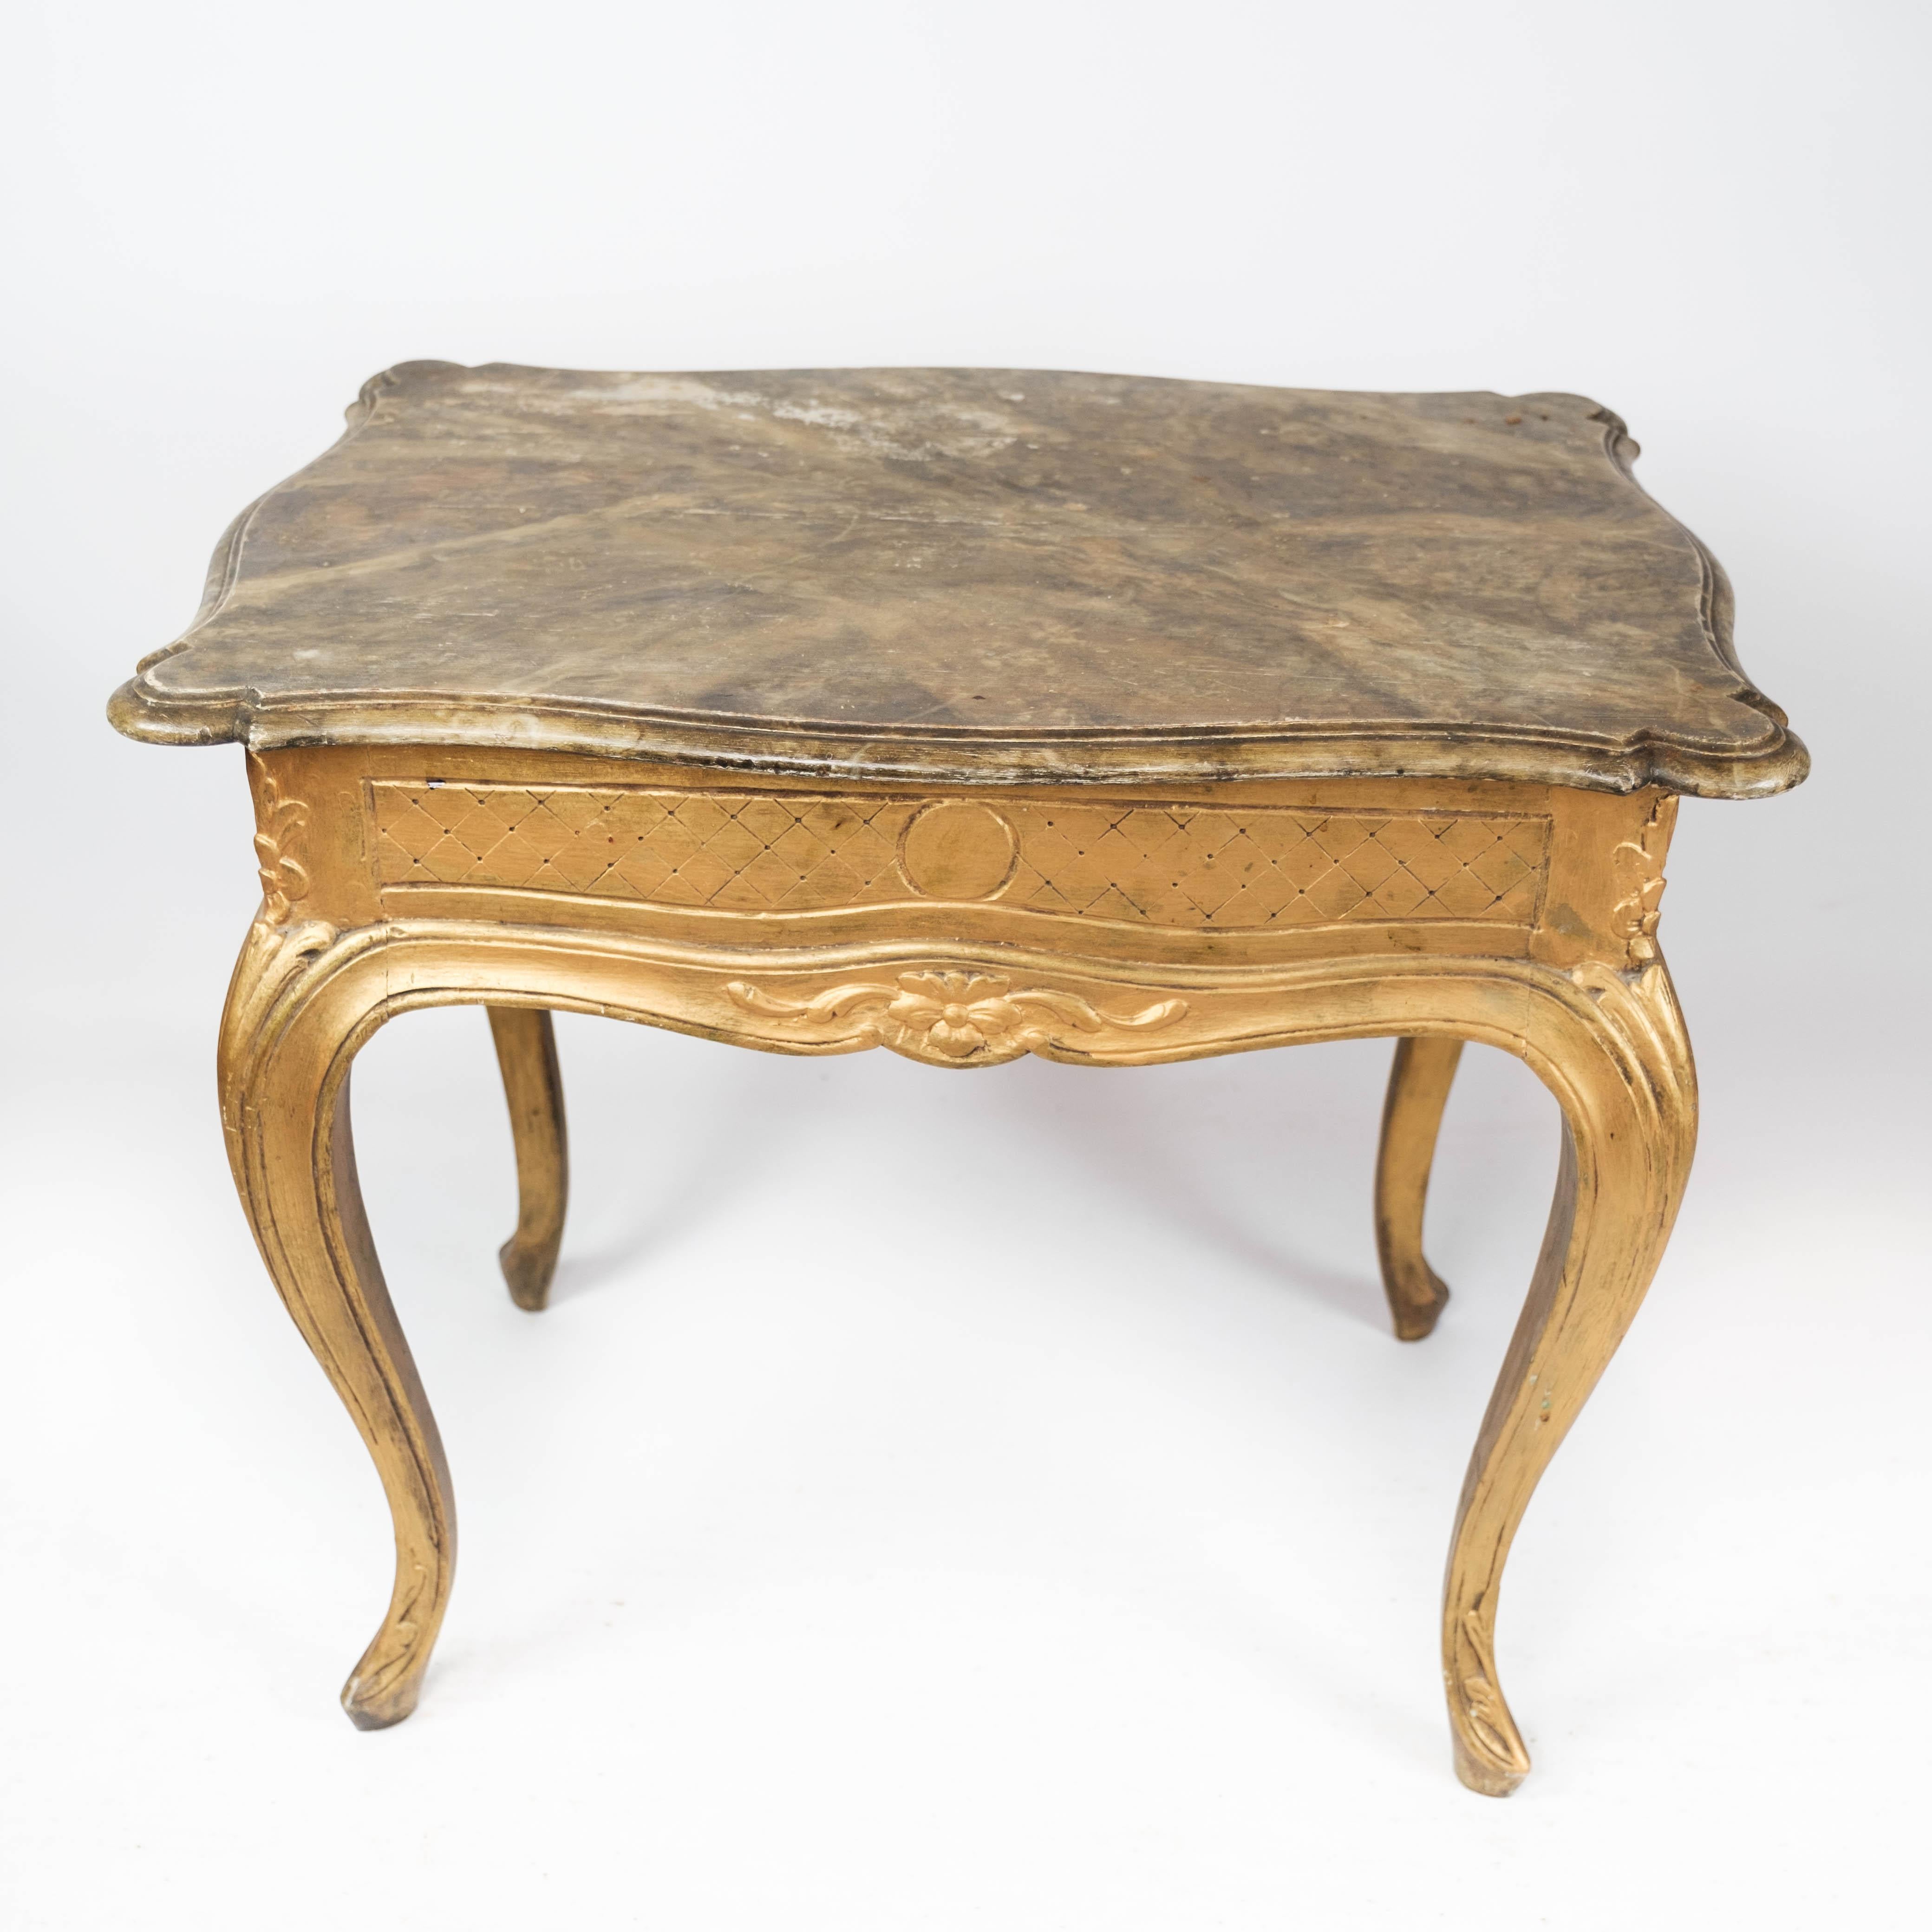 Rococo Revival side table with marbled tabletop and frame of gilded wood, in great antique condition from the 1860s.